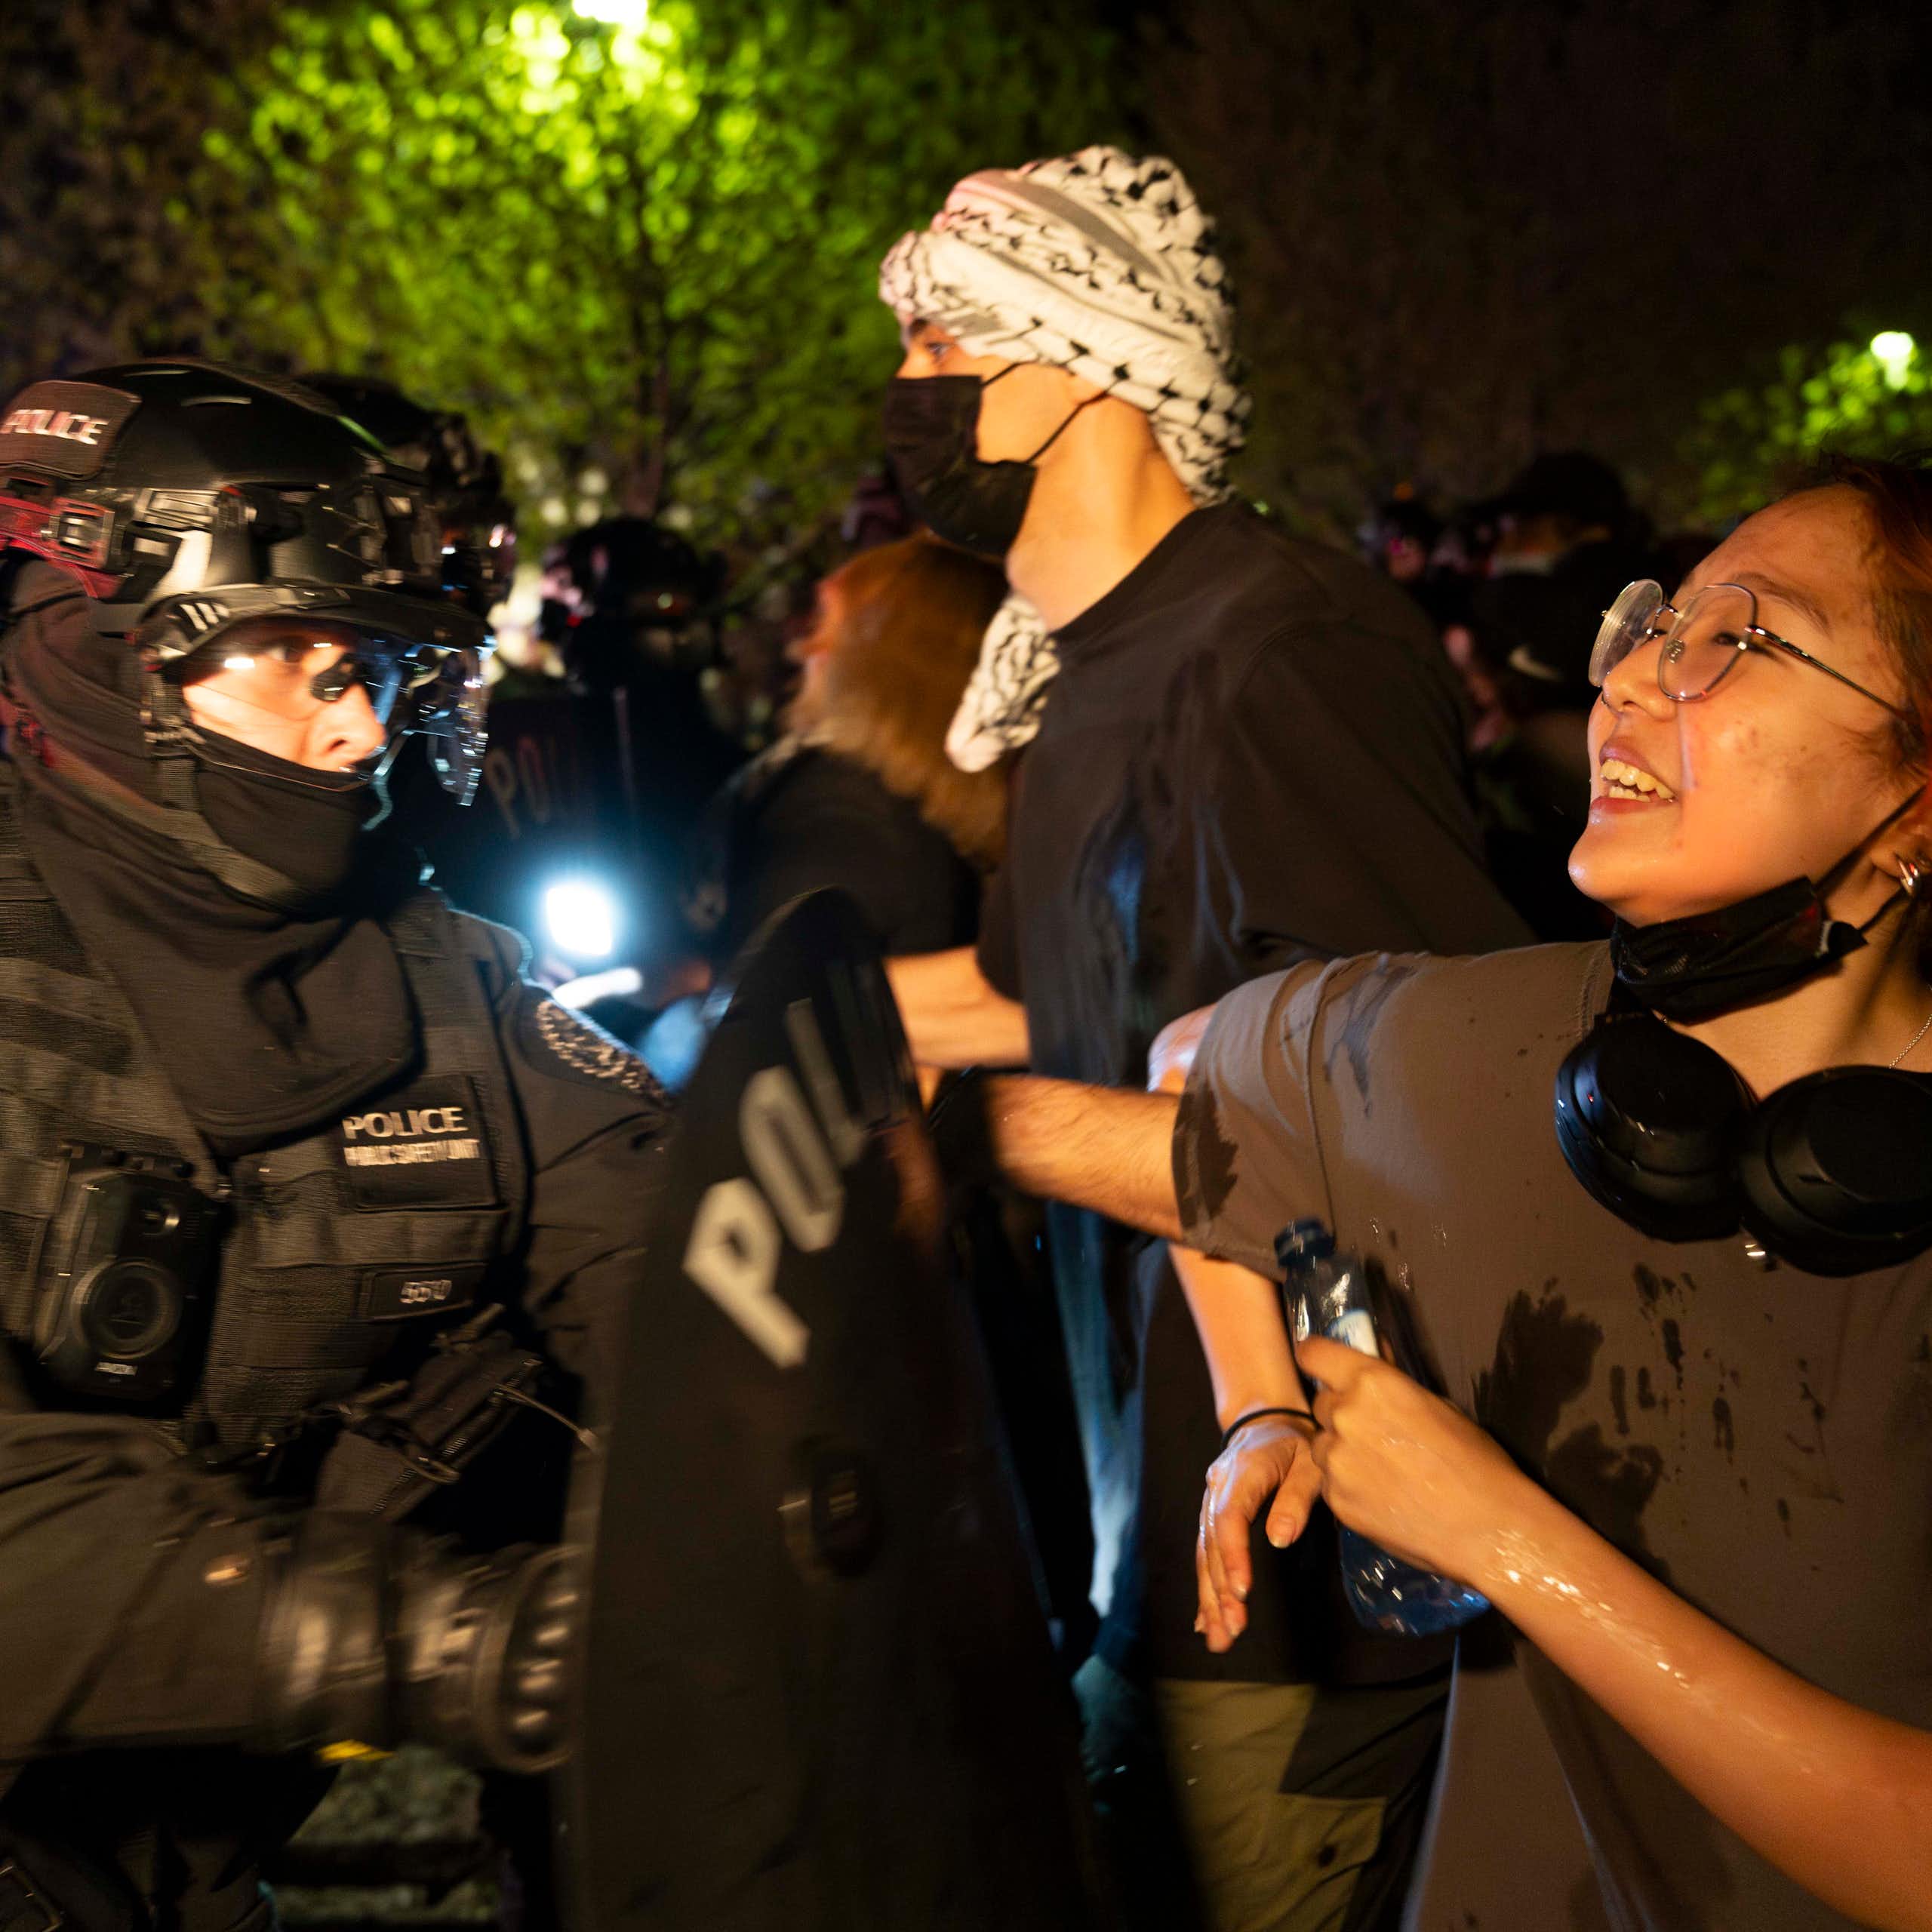 Protesters link arms as police officers try to break them up.